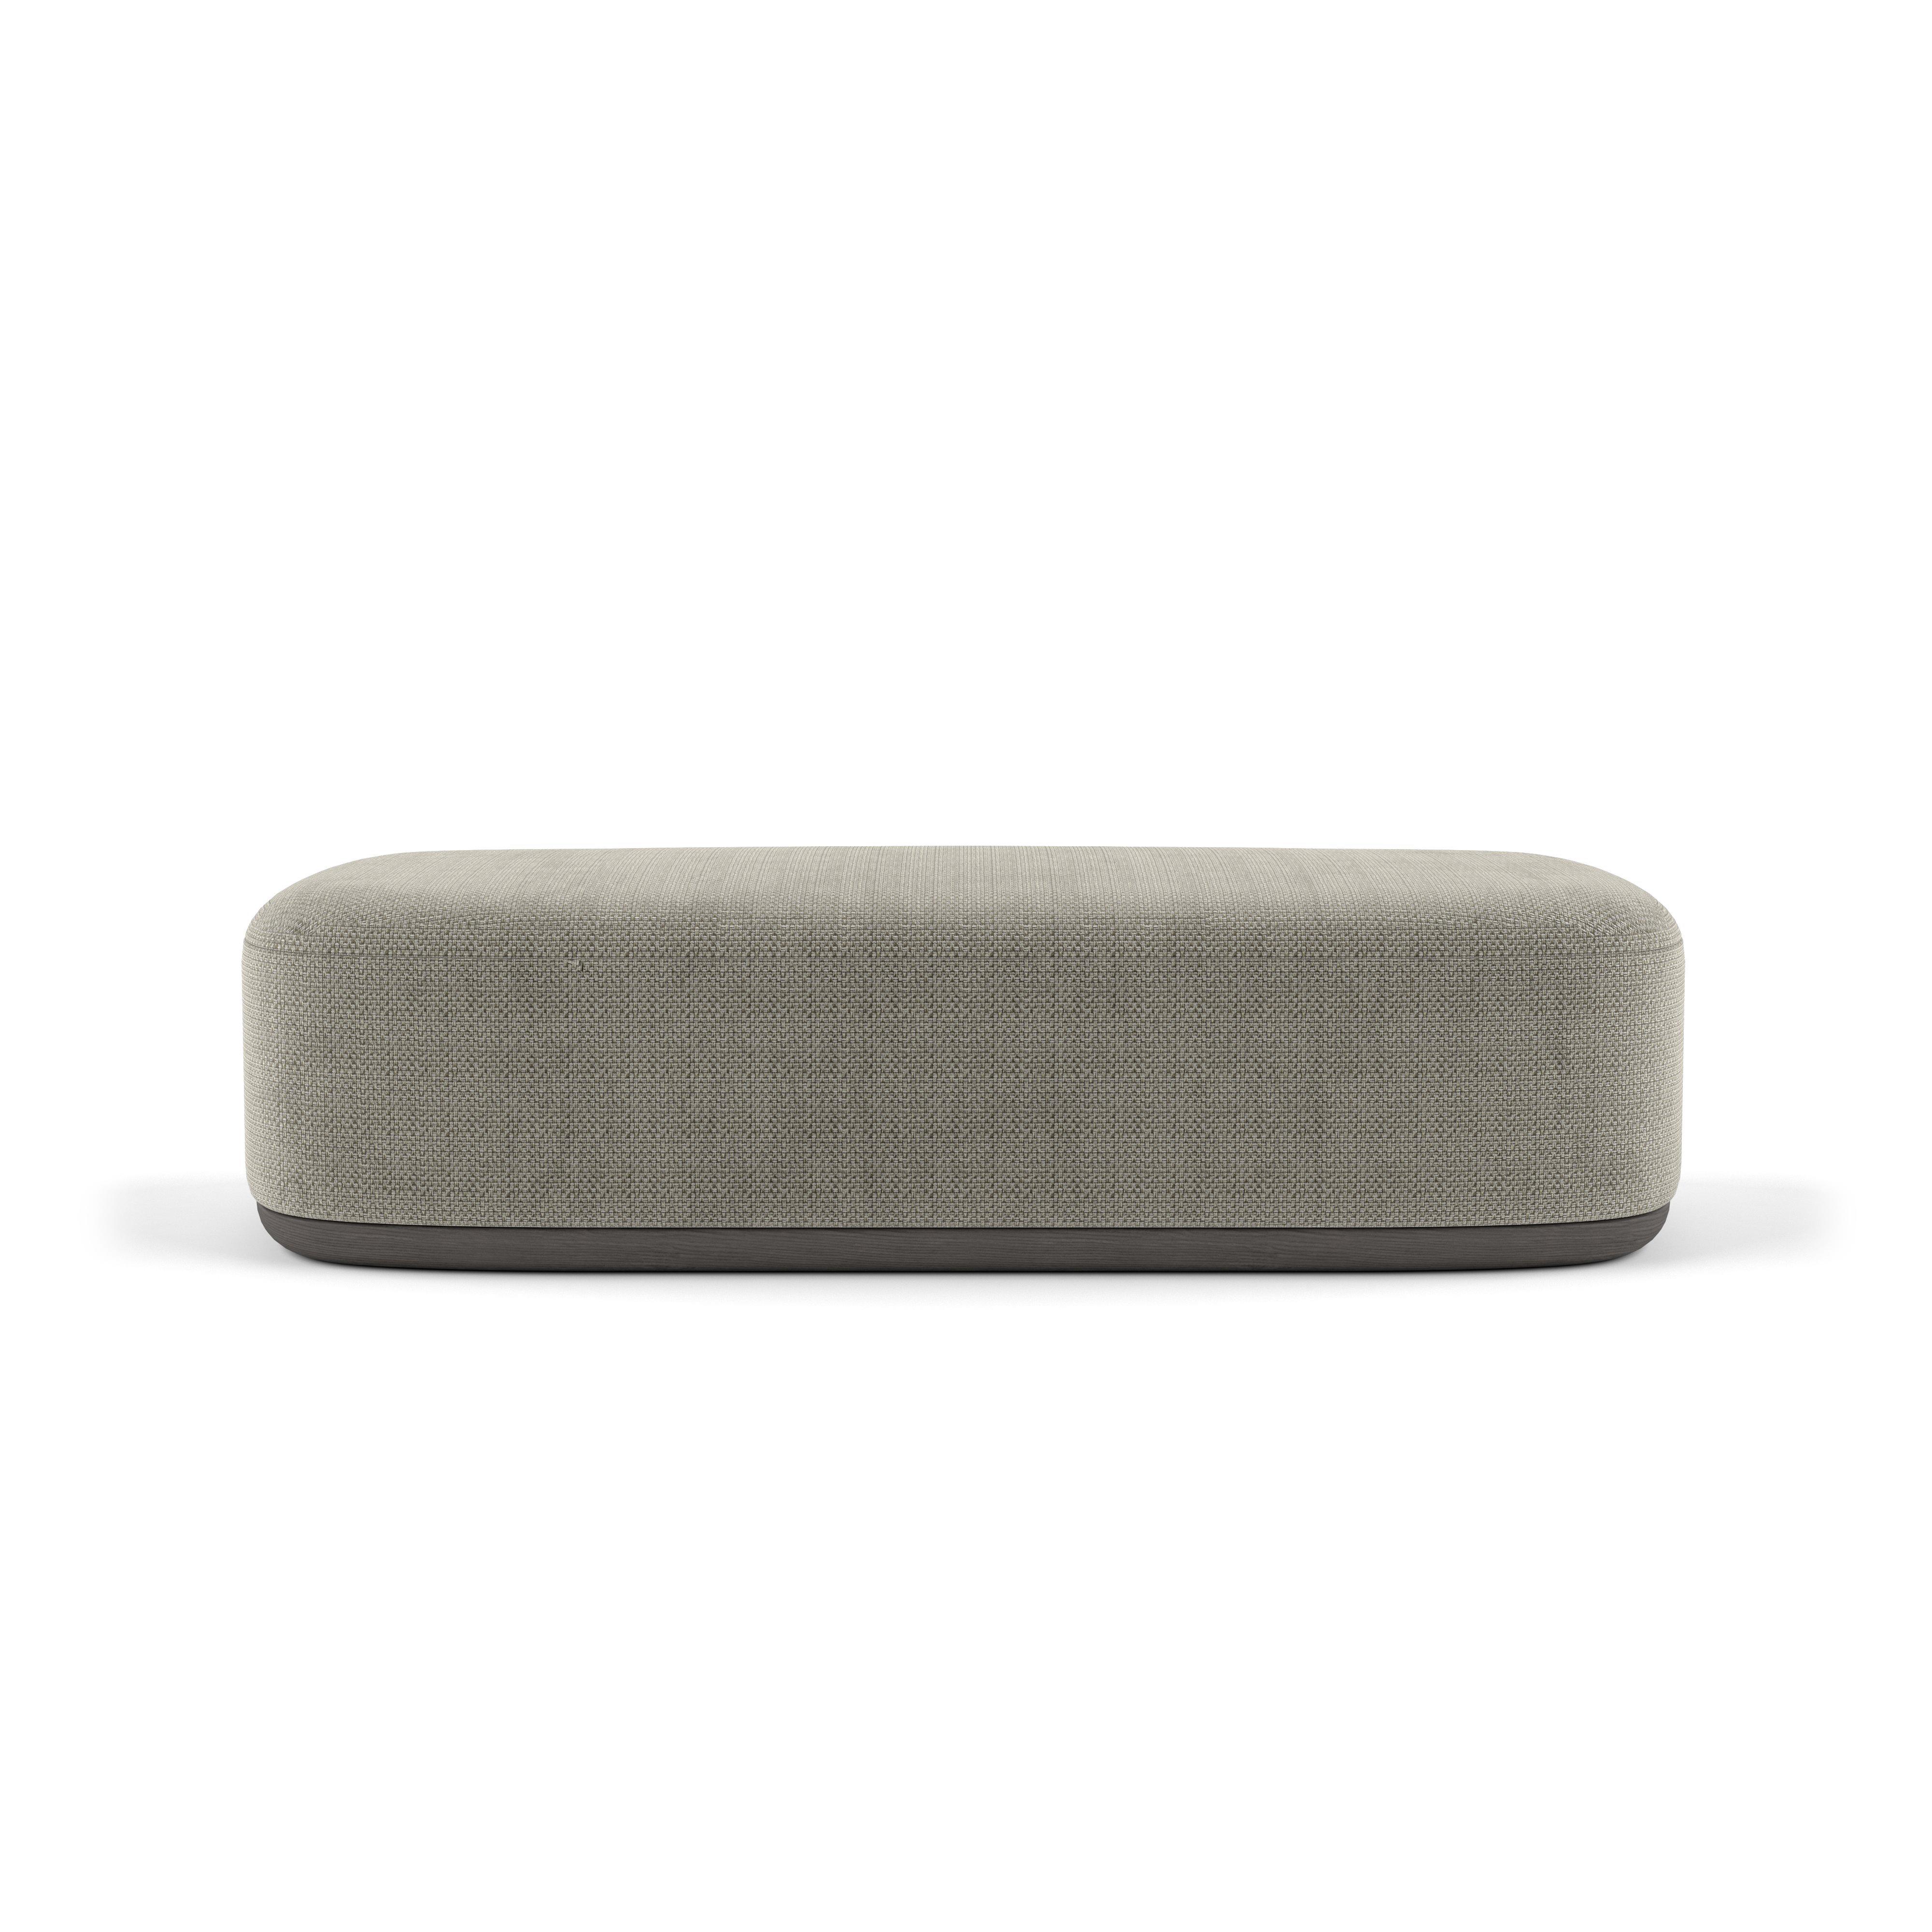 Unio Bench by Poiat 
Designers: Timo Mikkonen & Antti Rouhunkoski 

Collection UNIO 2023

Dimensions: H. 40 x W. 150 D. 72 cm SH. 40 
Model shown: Cat 3. Hanoi 04 by Pierre Frey
 
The Unio Collection, featuring an armchair, ottomans, sofas, marks a